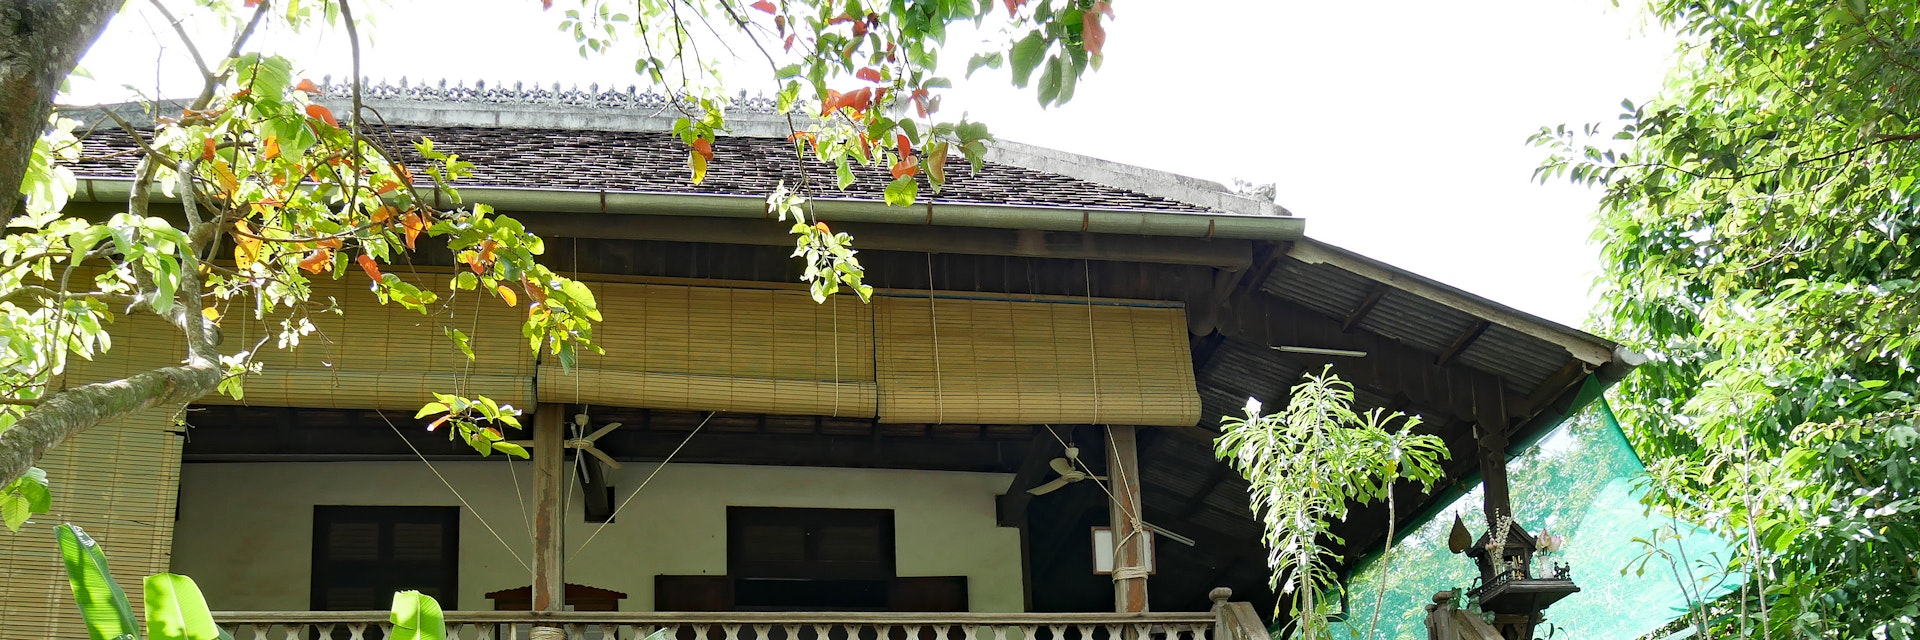 A one hundred year old Cambodian house built in the traditional Khmer style in Wat Kor Village, Battambang, Cambodia.